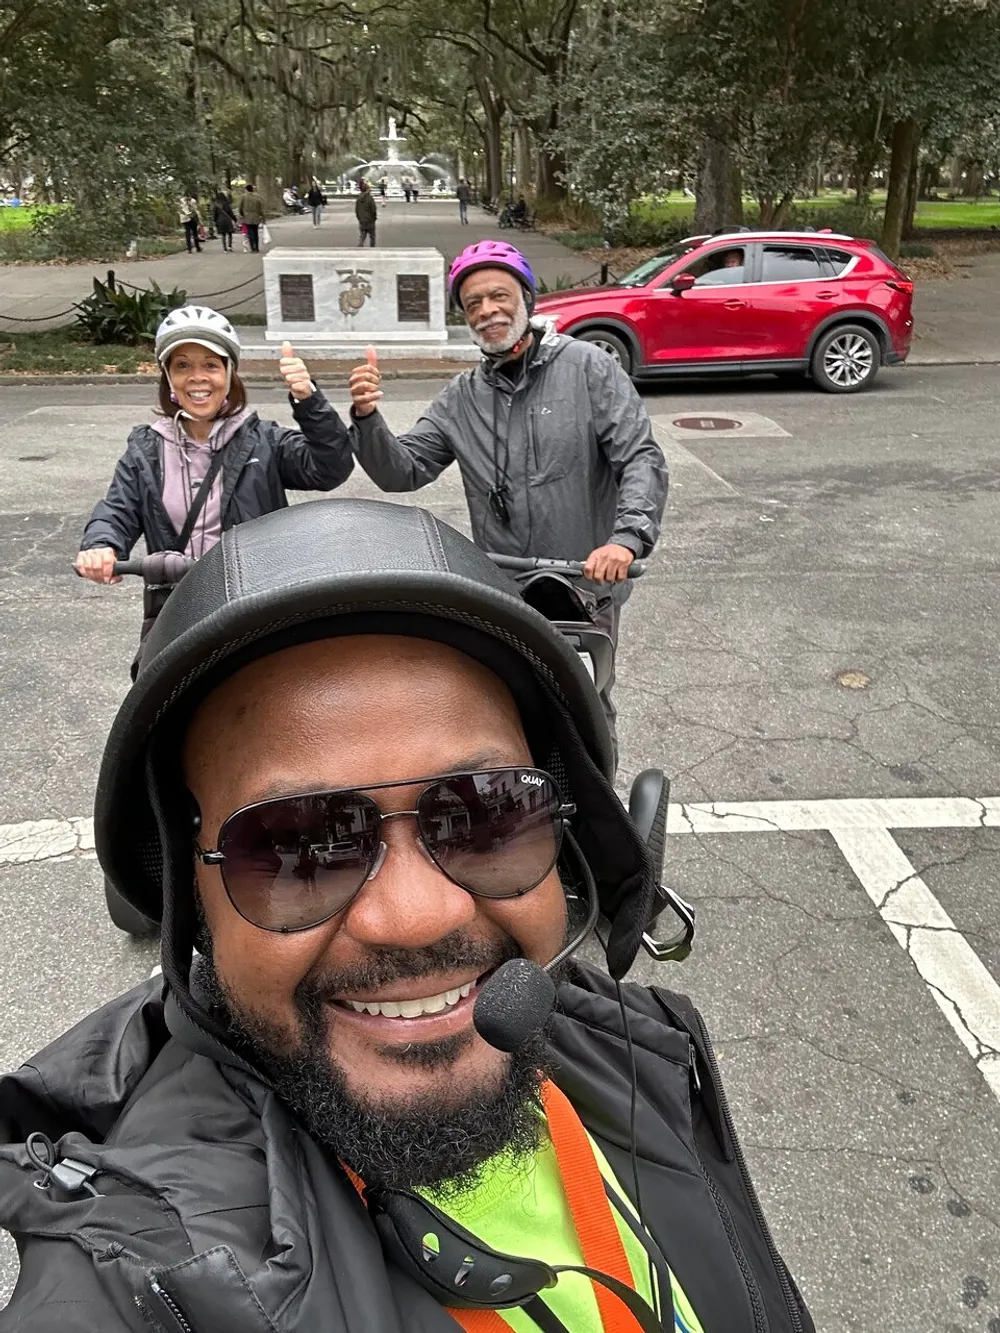 Three people wearing helmets and casual attire are smiling for a selfie on a tree-lined street with two giving a thumbs-up and a fountain visible in the background